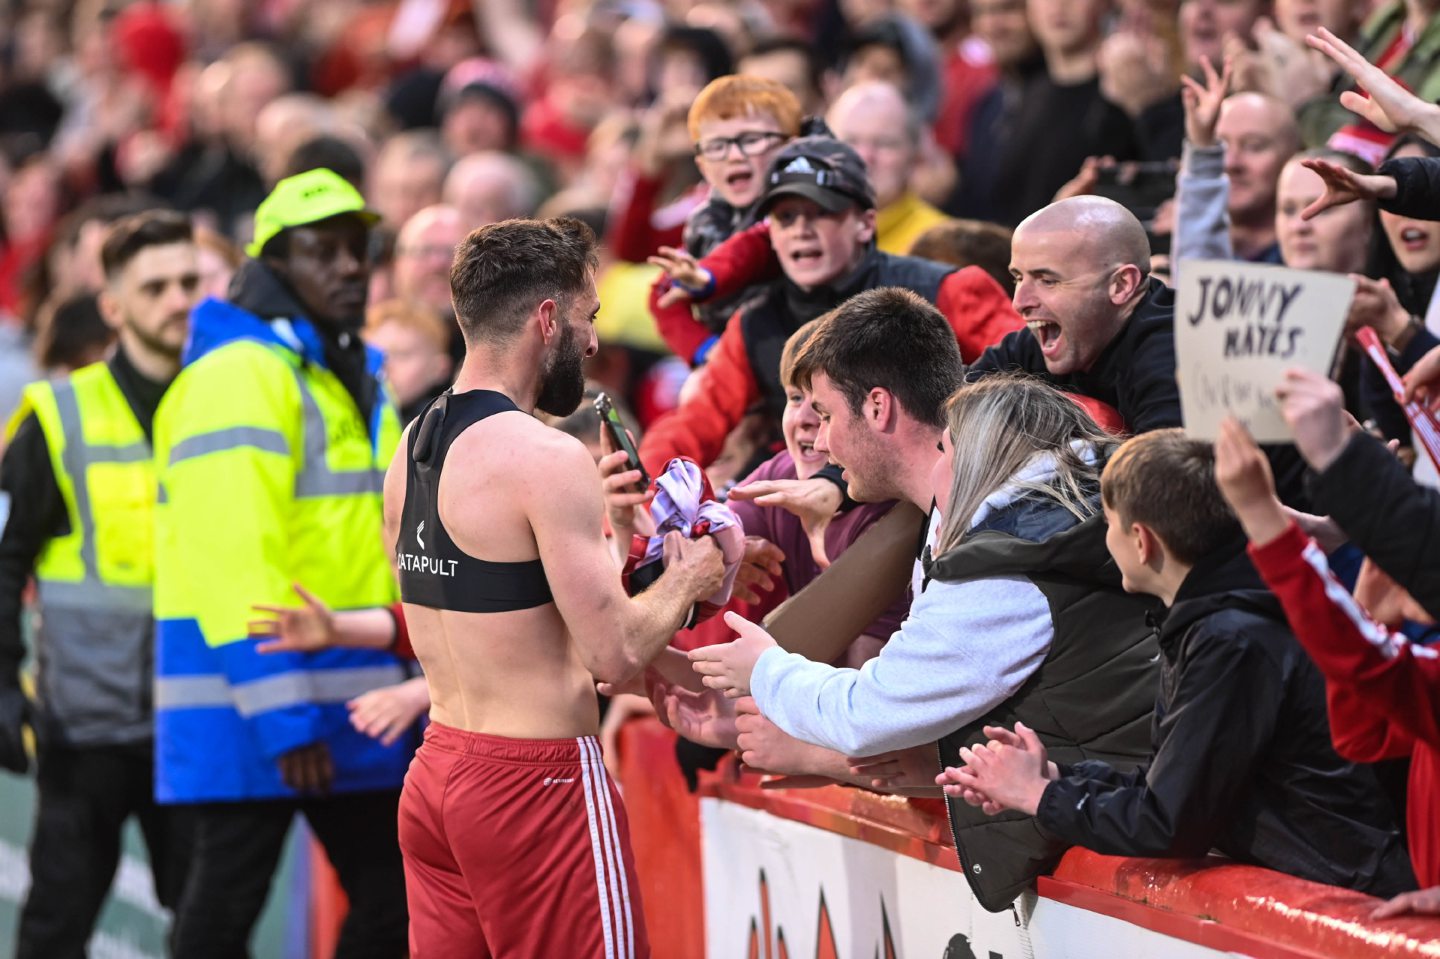 Captain Graeme Shinnie giving away his shirt to a fan in the crowd after securing European qualification